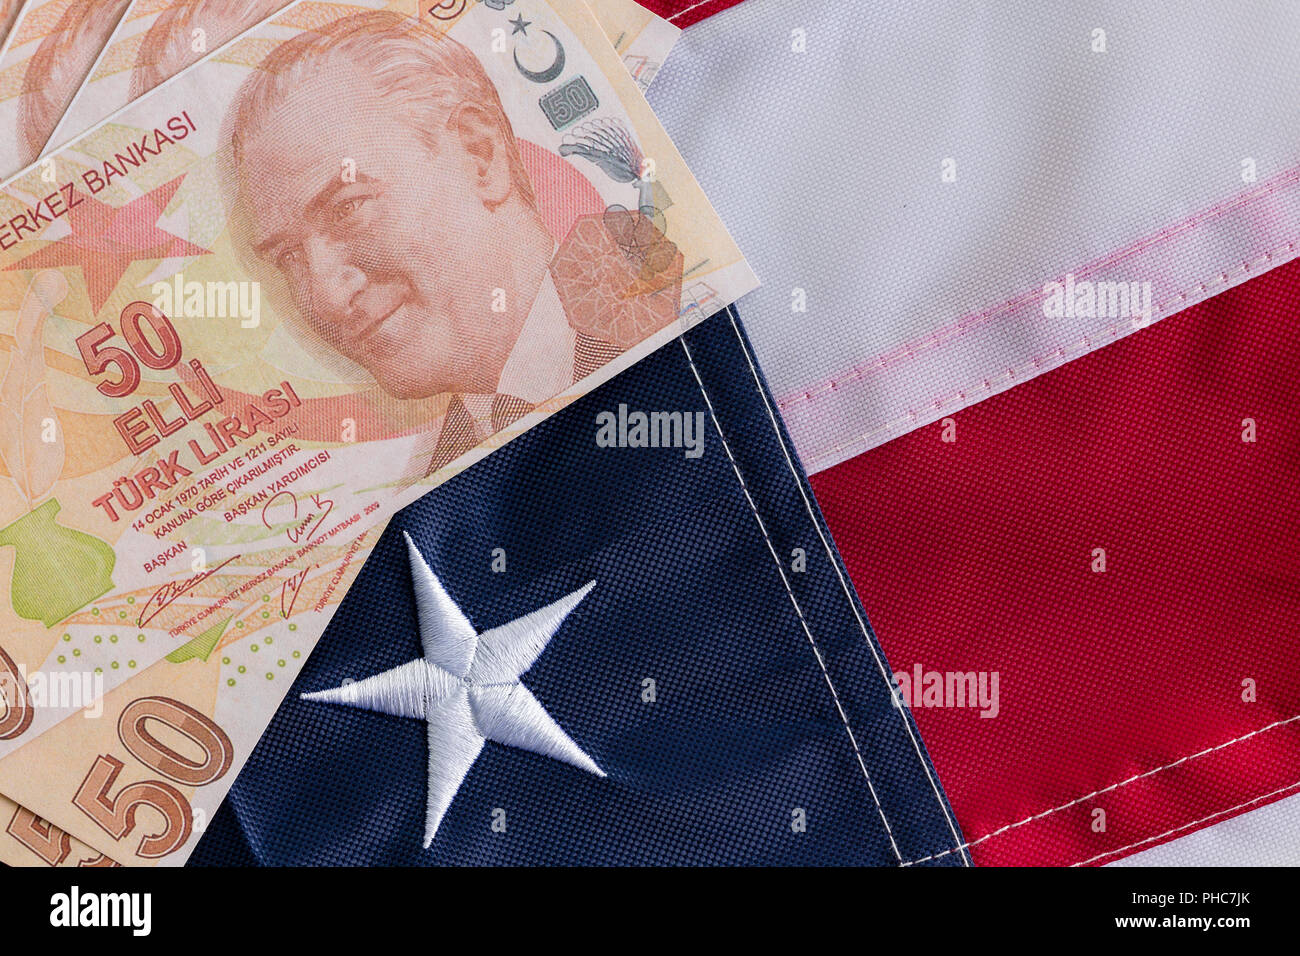 Turkish lira banknotes on a United States flag in a conceptual image of politics and currency devaluation in emerging markets in a closeup full frame  Stock Photo